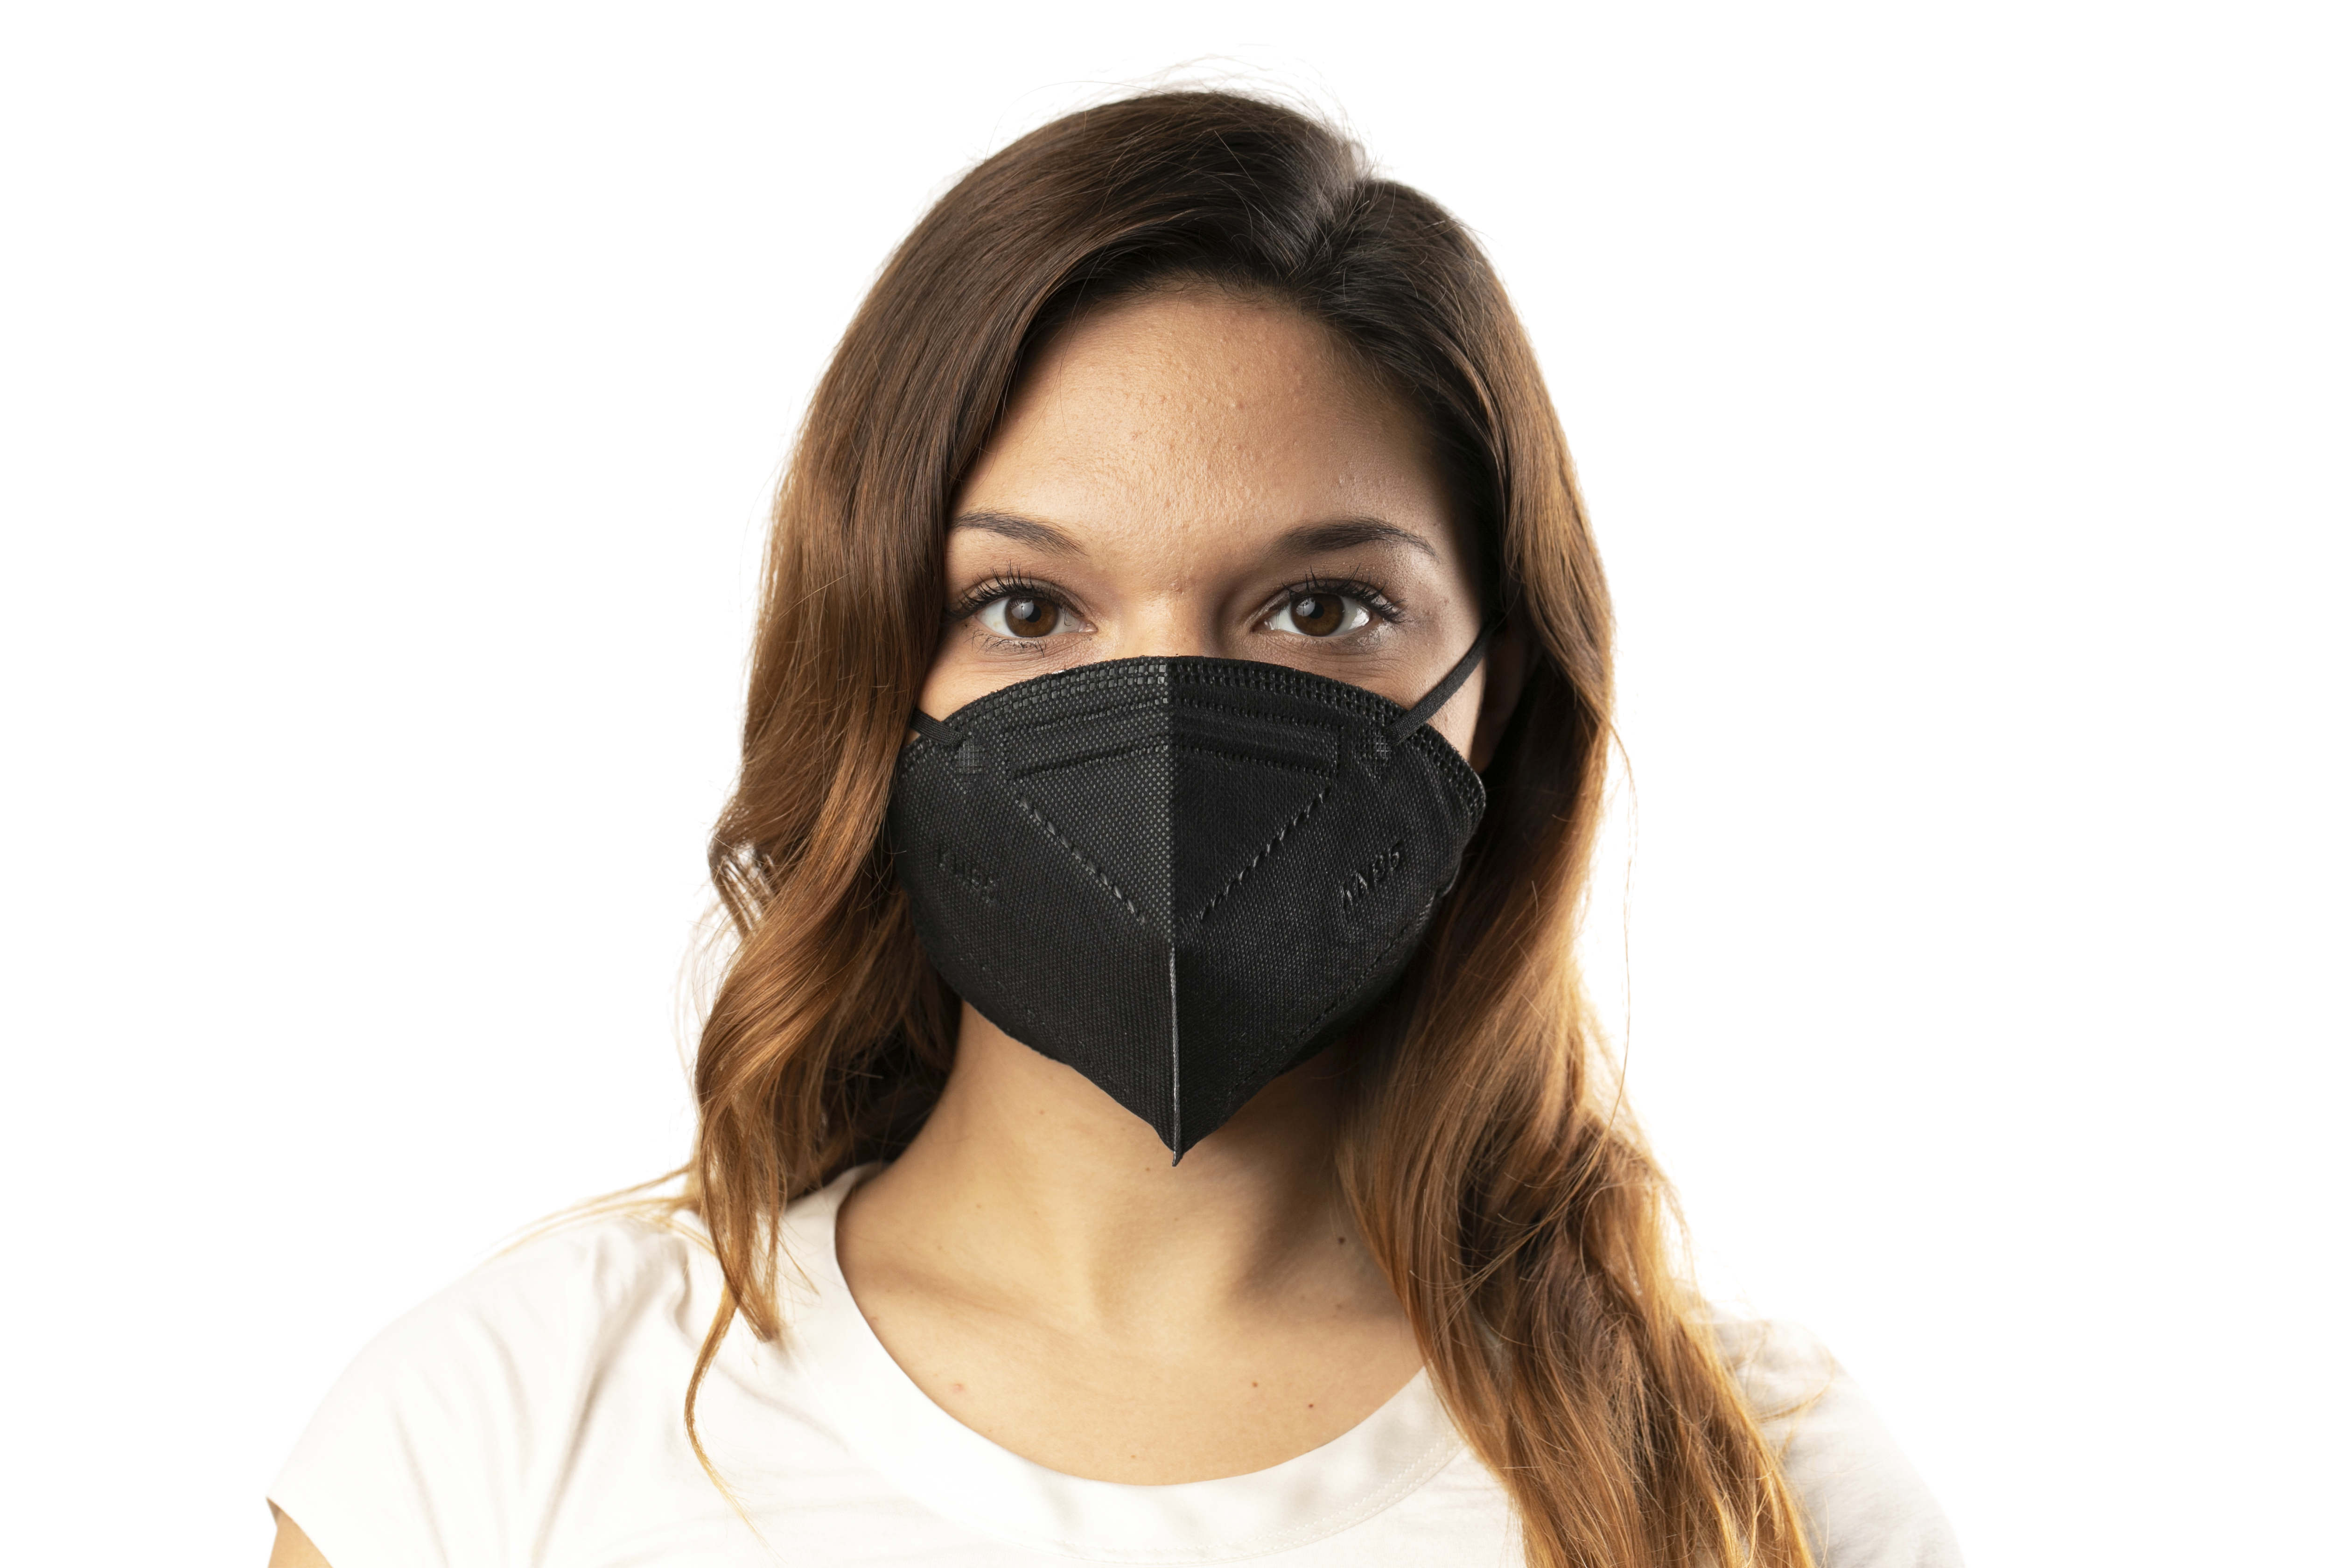 KN95 Masks - Free Masks Included with Purchase